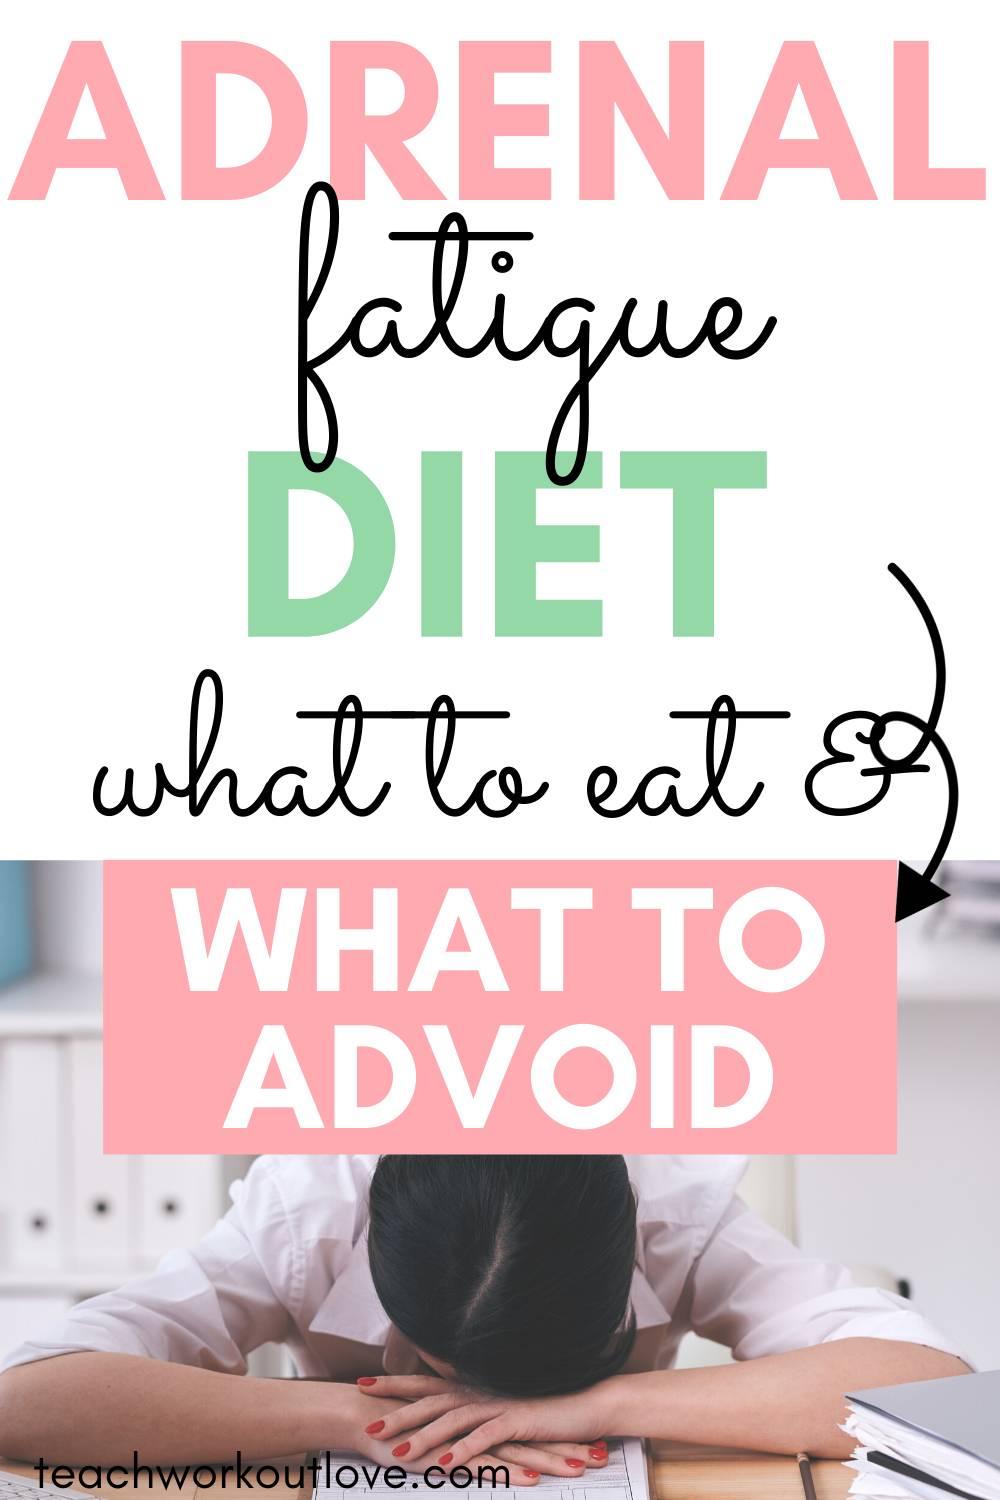 What is adrenal fatigue? Do you have it? Read through our article to find out and then how to adjust to an adrenal fatigue diet.